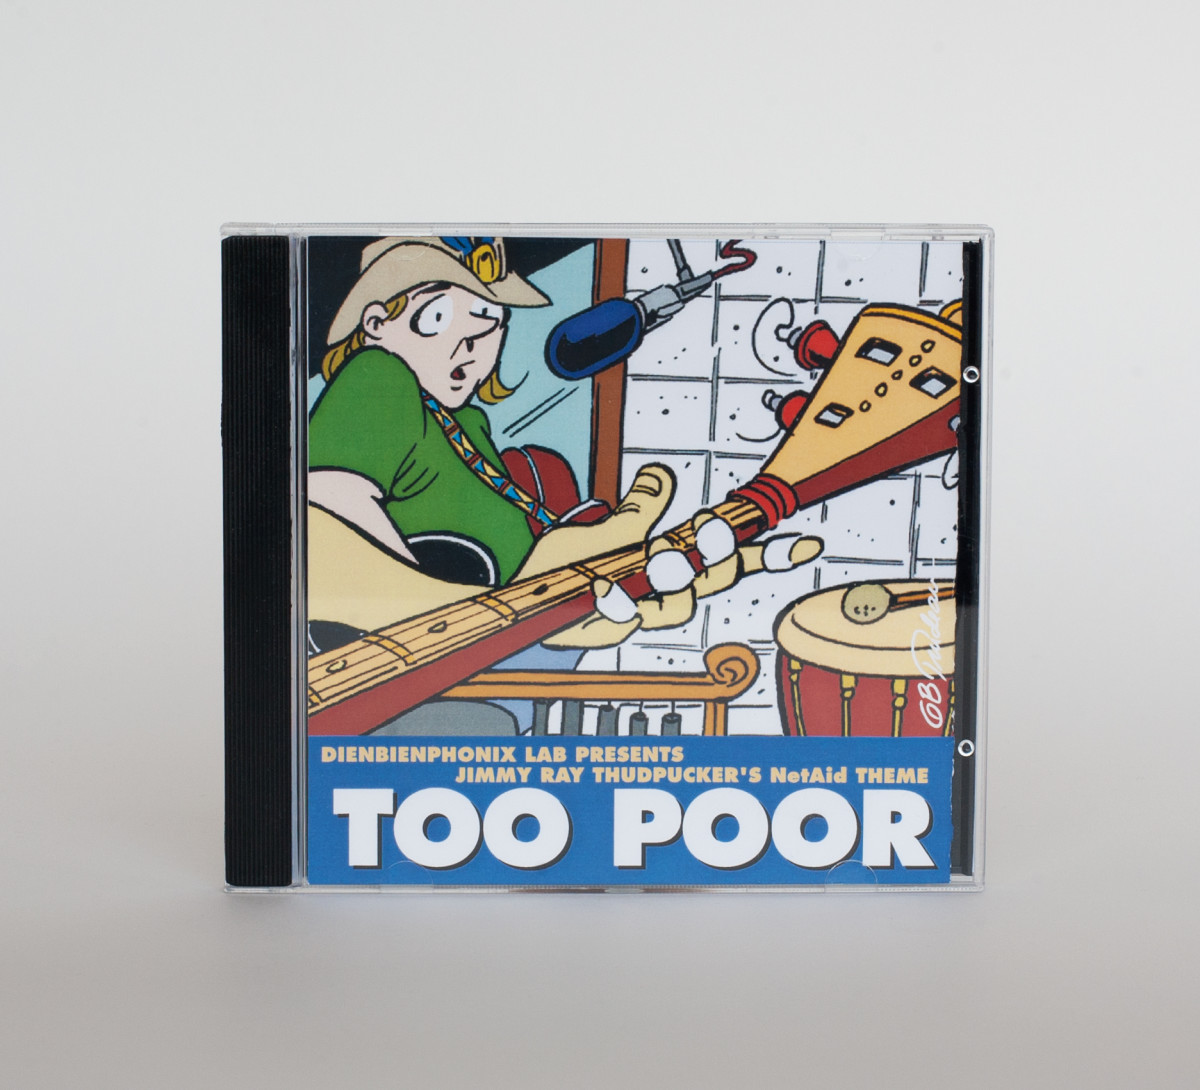 "Too Poor" by Garry Trudeau 